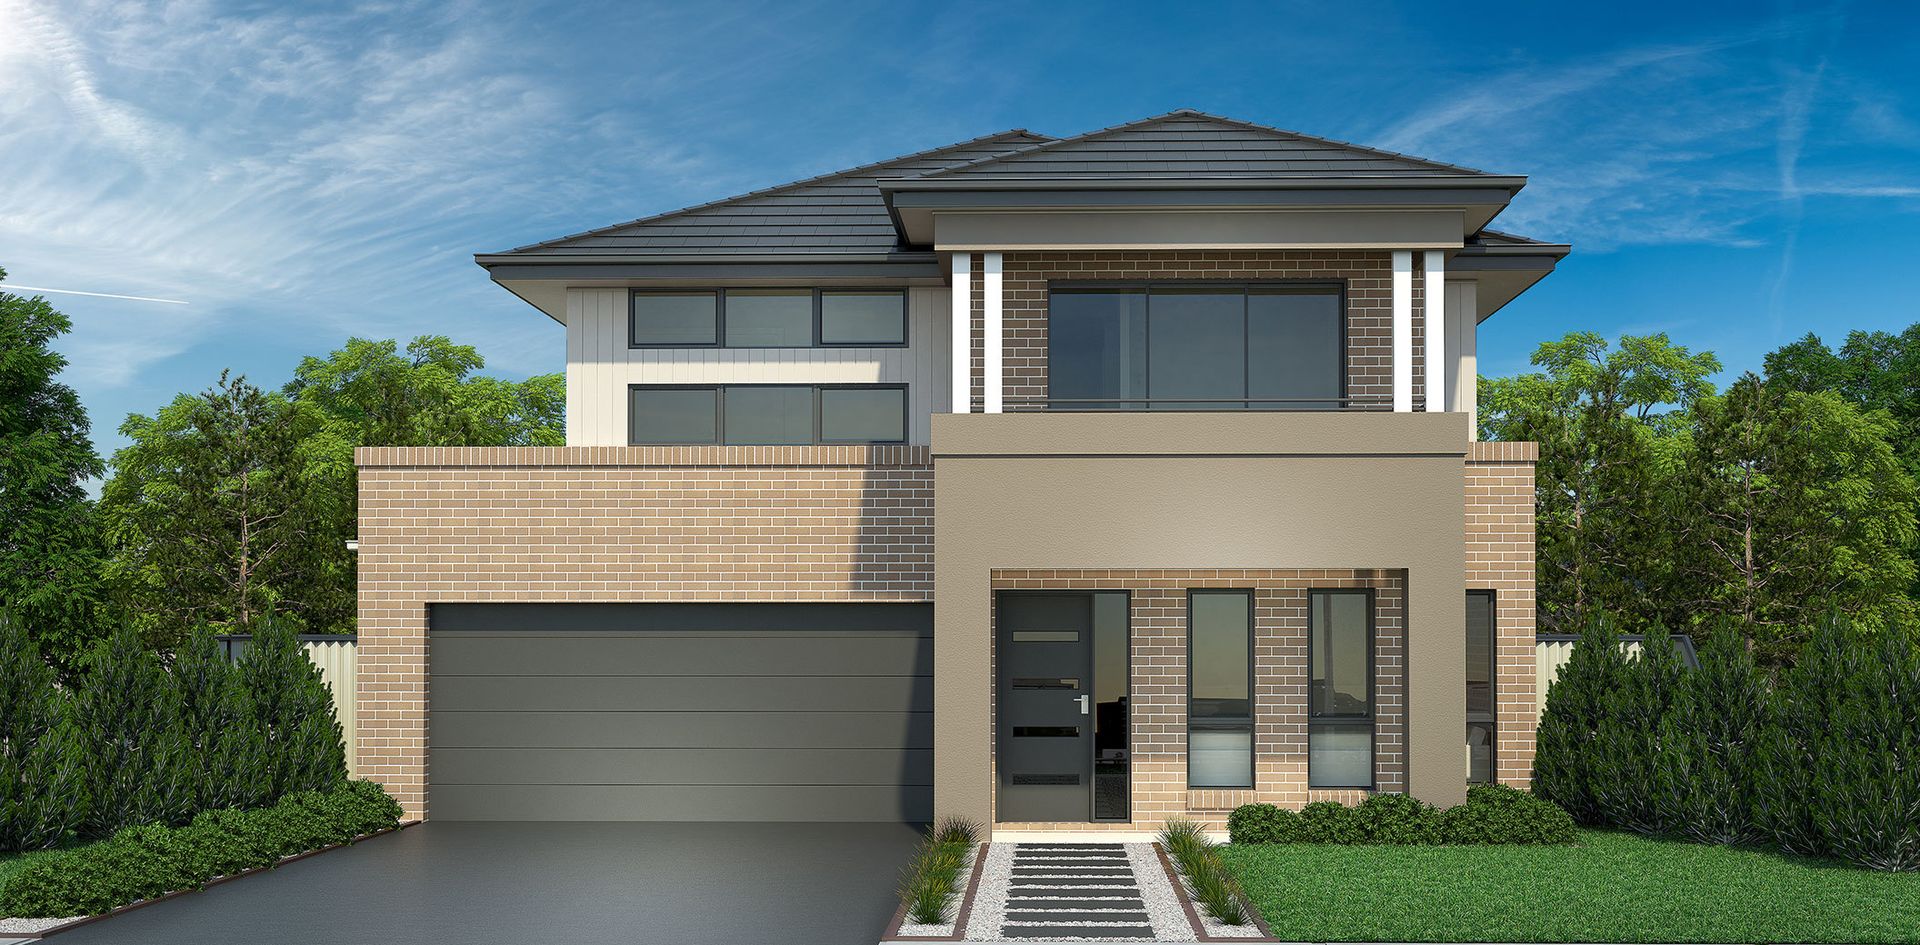 4 bedrooms New House & Land in  PRESTONS NSW, 2170